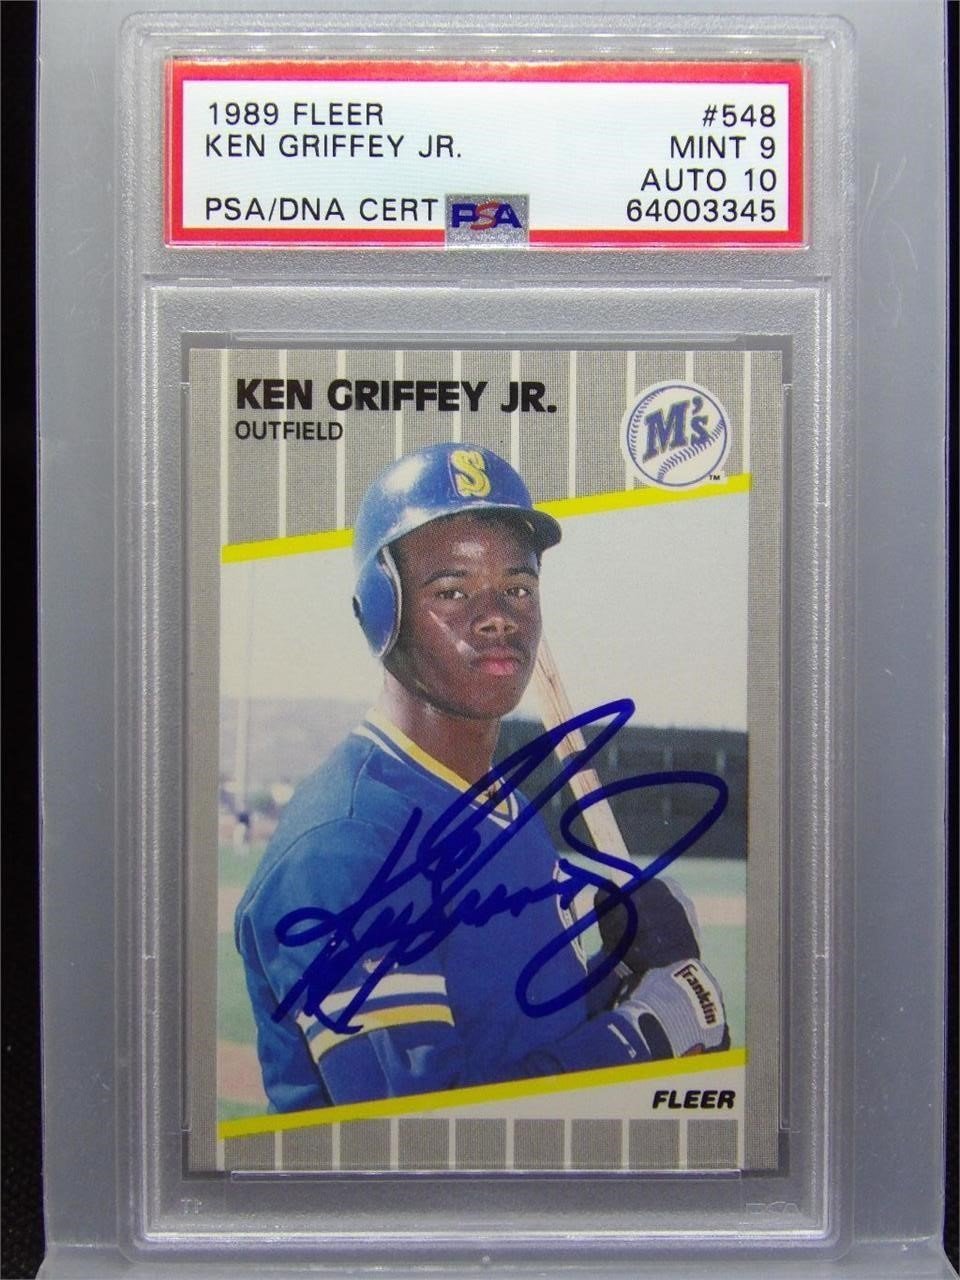 Mixed Sports Card Auction - Closes May 12th 7:00 Central